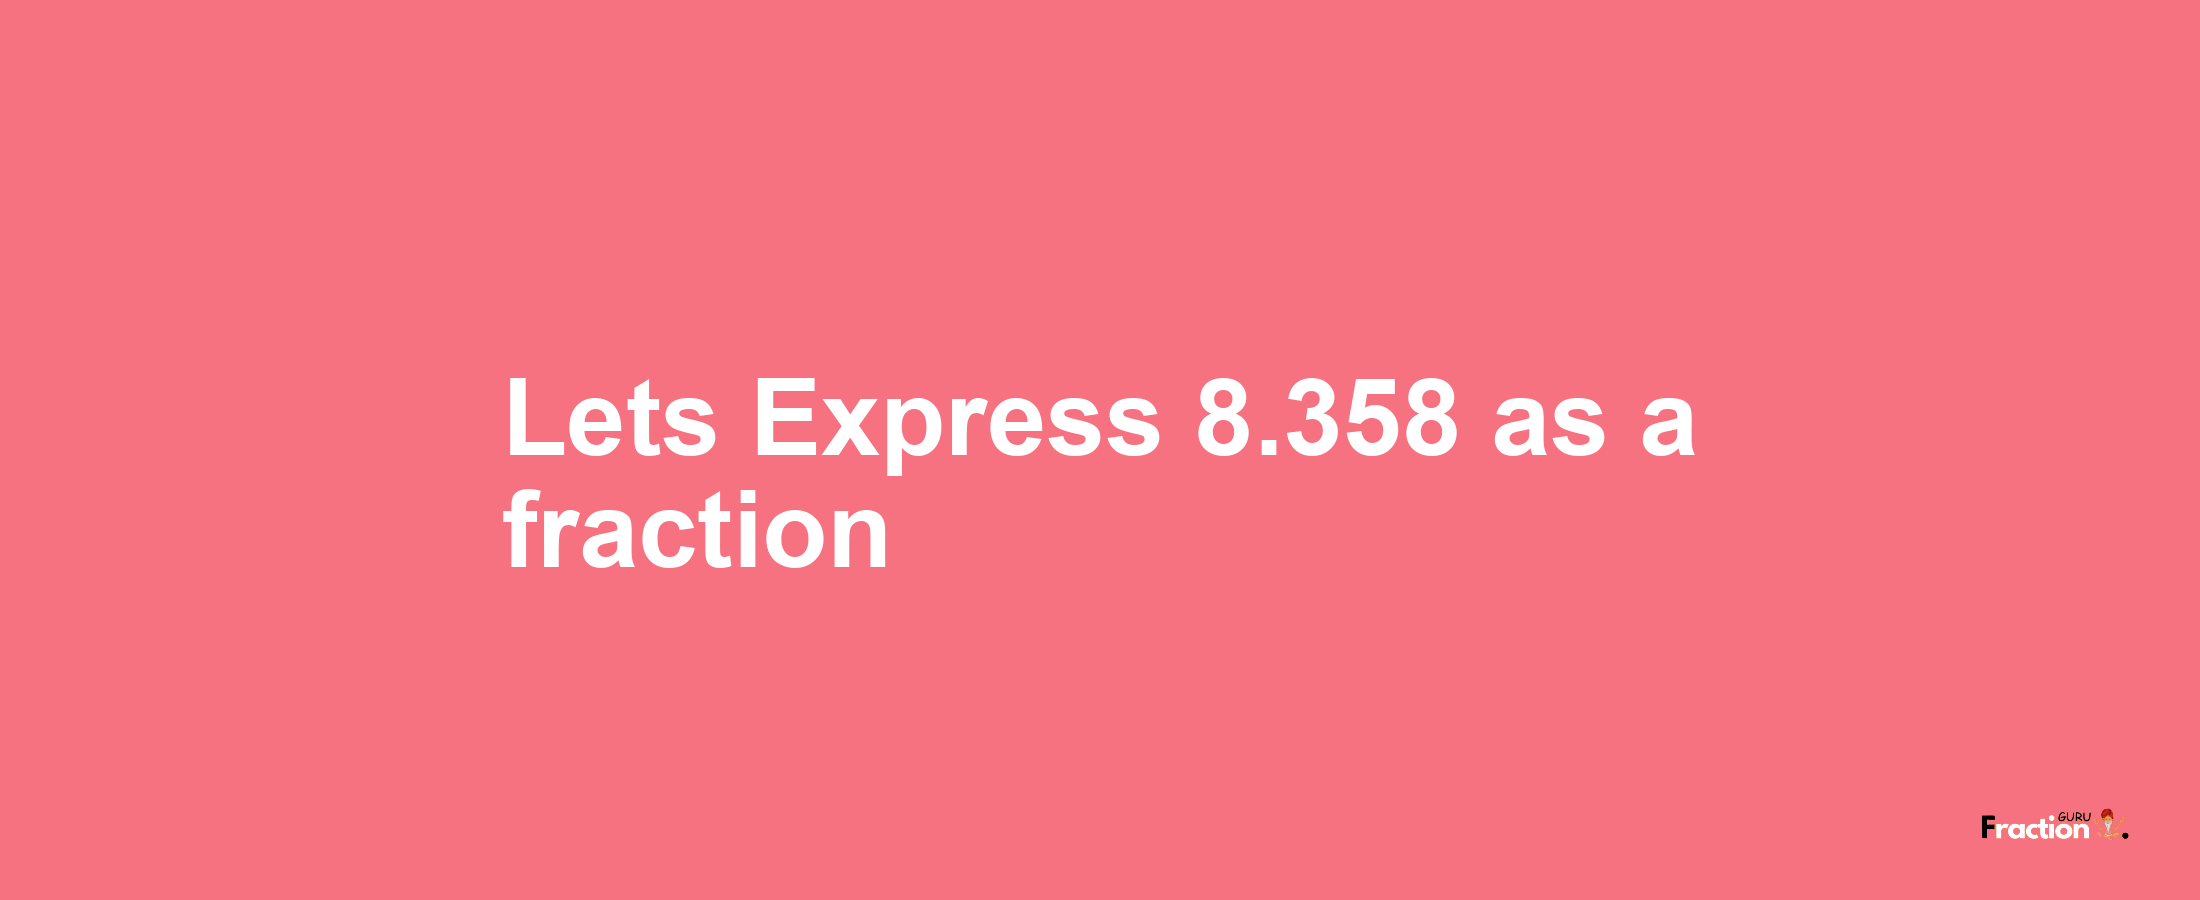 Lets Express 8.358 as afraction